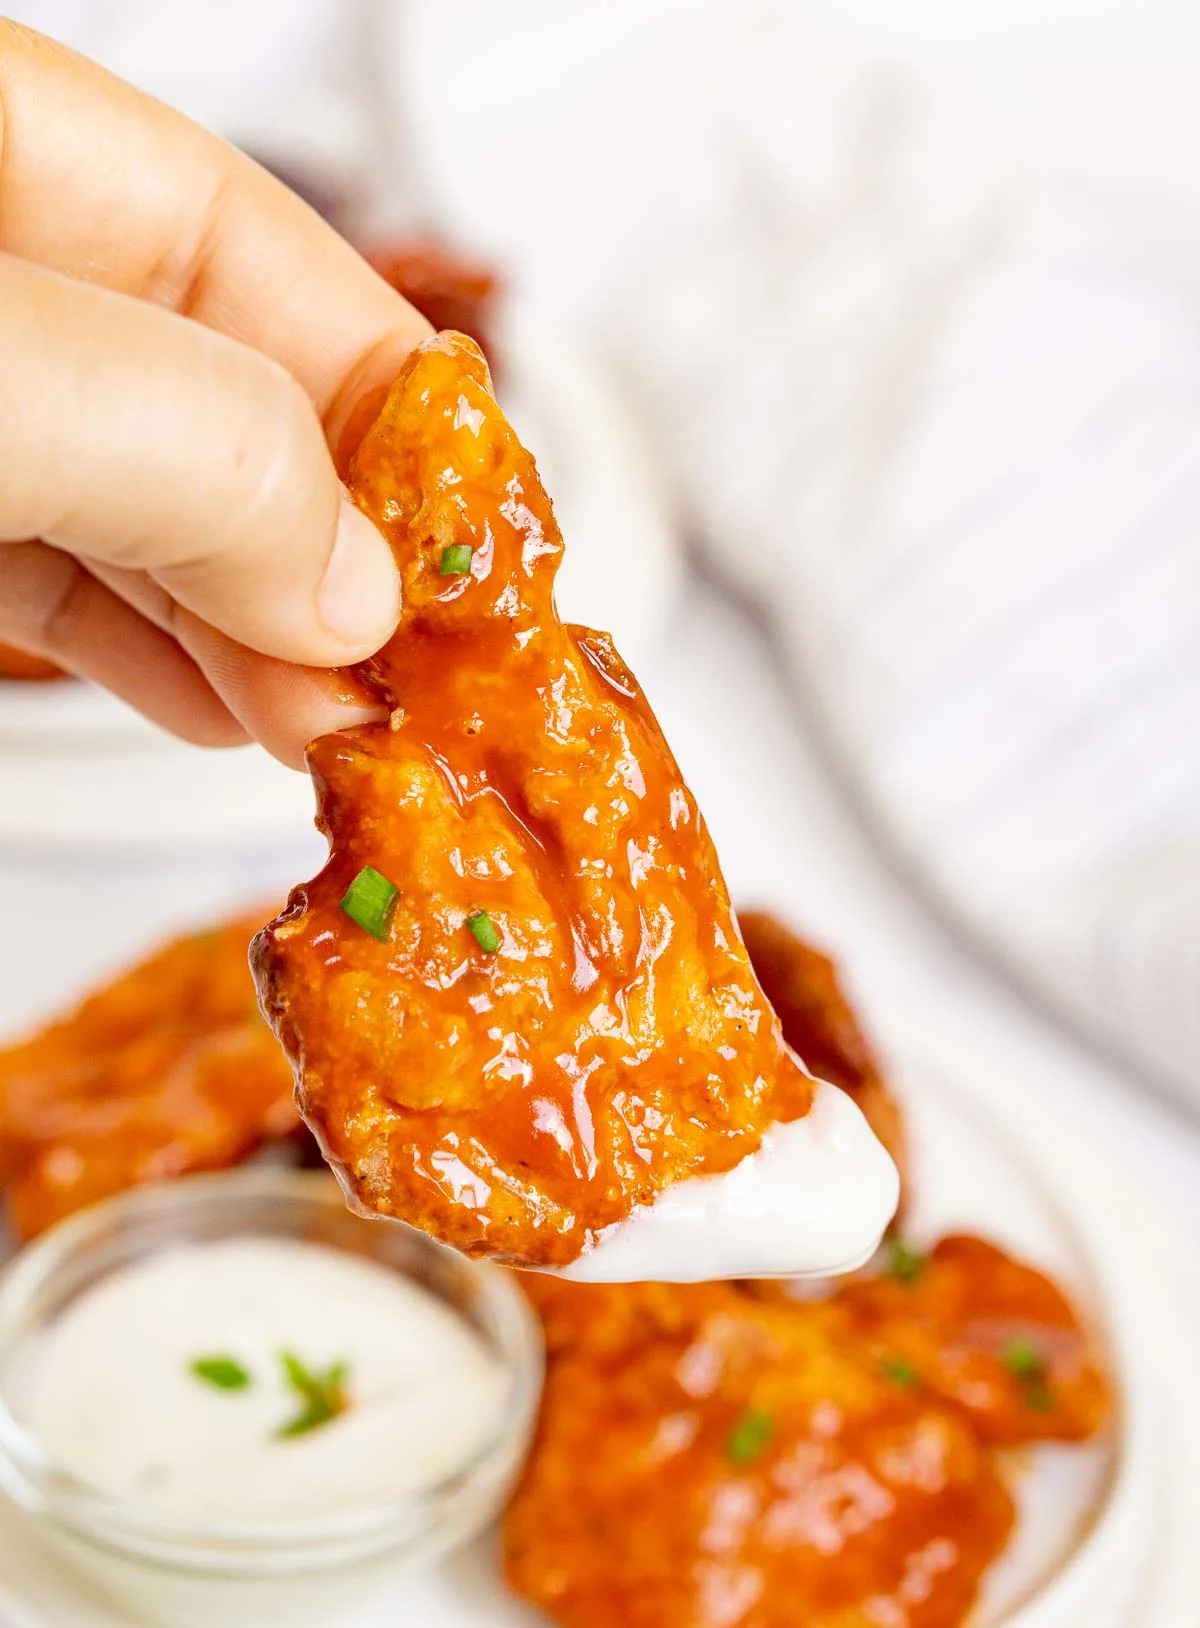 Hand holding piece of Chicken of the Wood Mushroom "wing" coated in Buffalo sauce